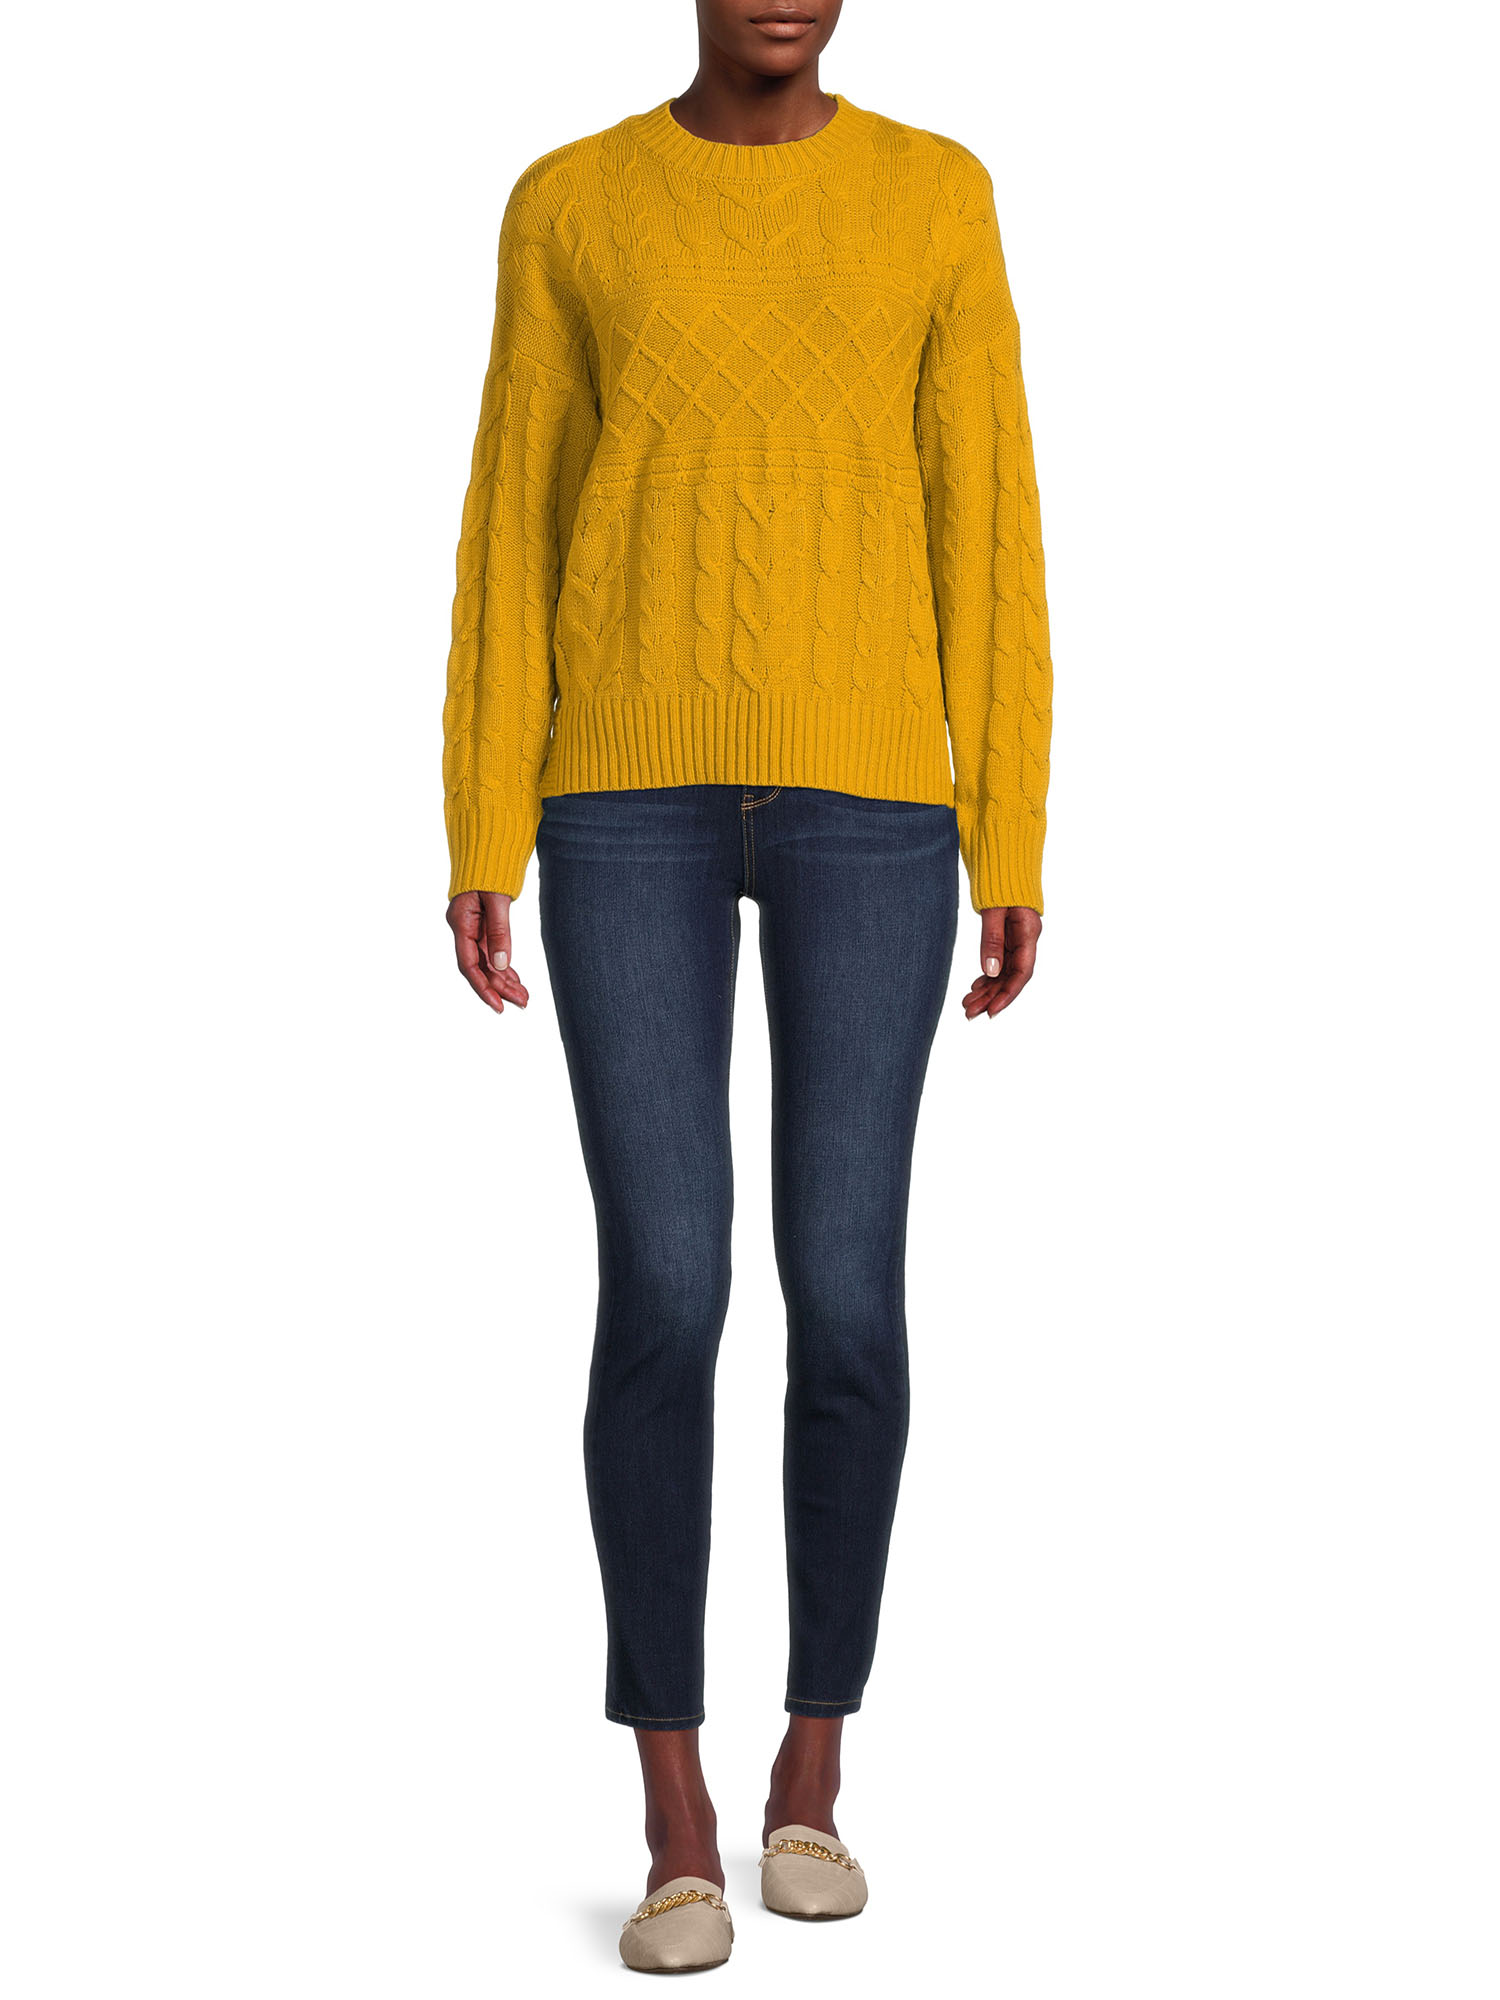 Time and Tru Women's Mixed Stitch Sweater - image 2 of 5